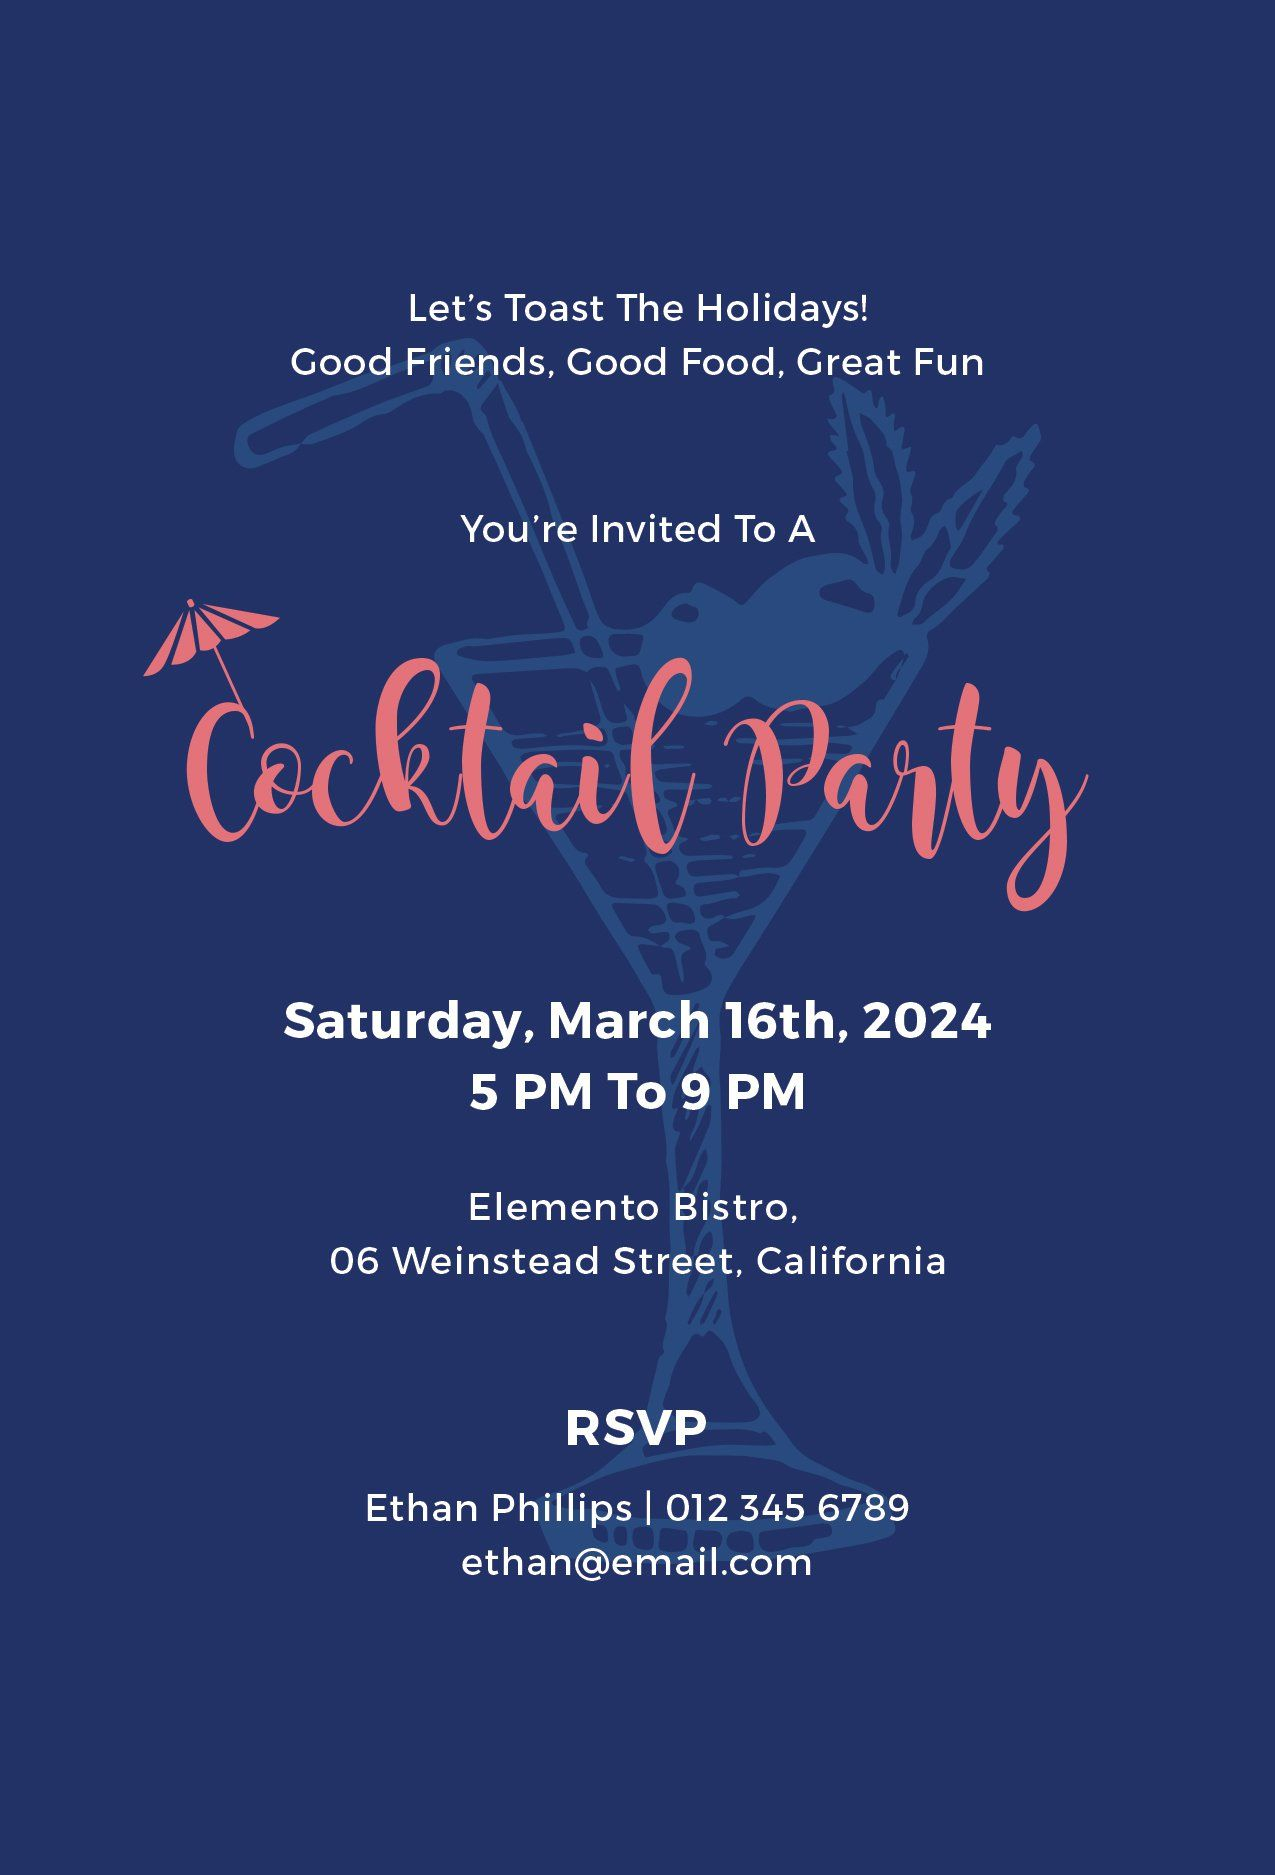 Free Cocktail Party Invitation Flyer Ideas Cocktail Party intended for dimensions 1275 X 1875